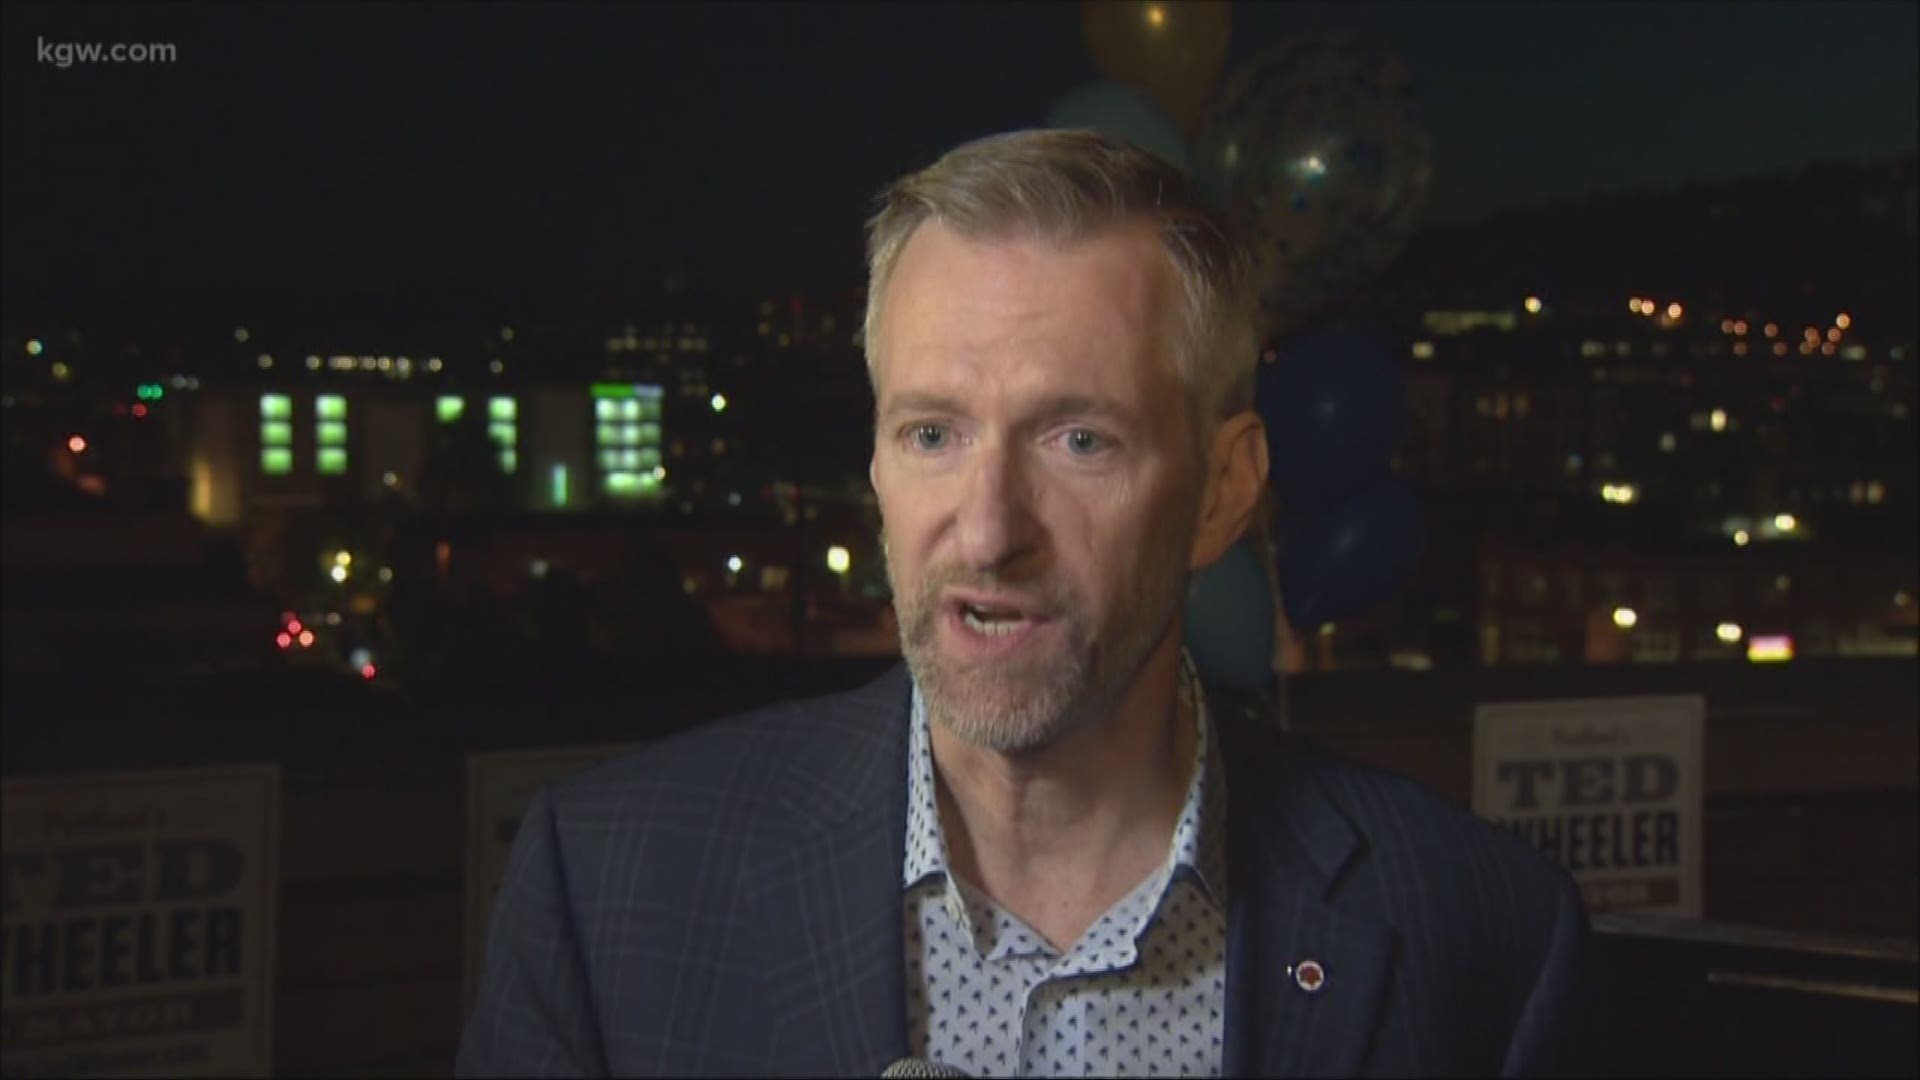 Portland Mayor Ted Wheeler announced his bid for re-election on Monday night. He said finding solutions to the homeless crisis will once again be his top priority.